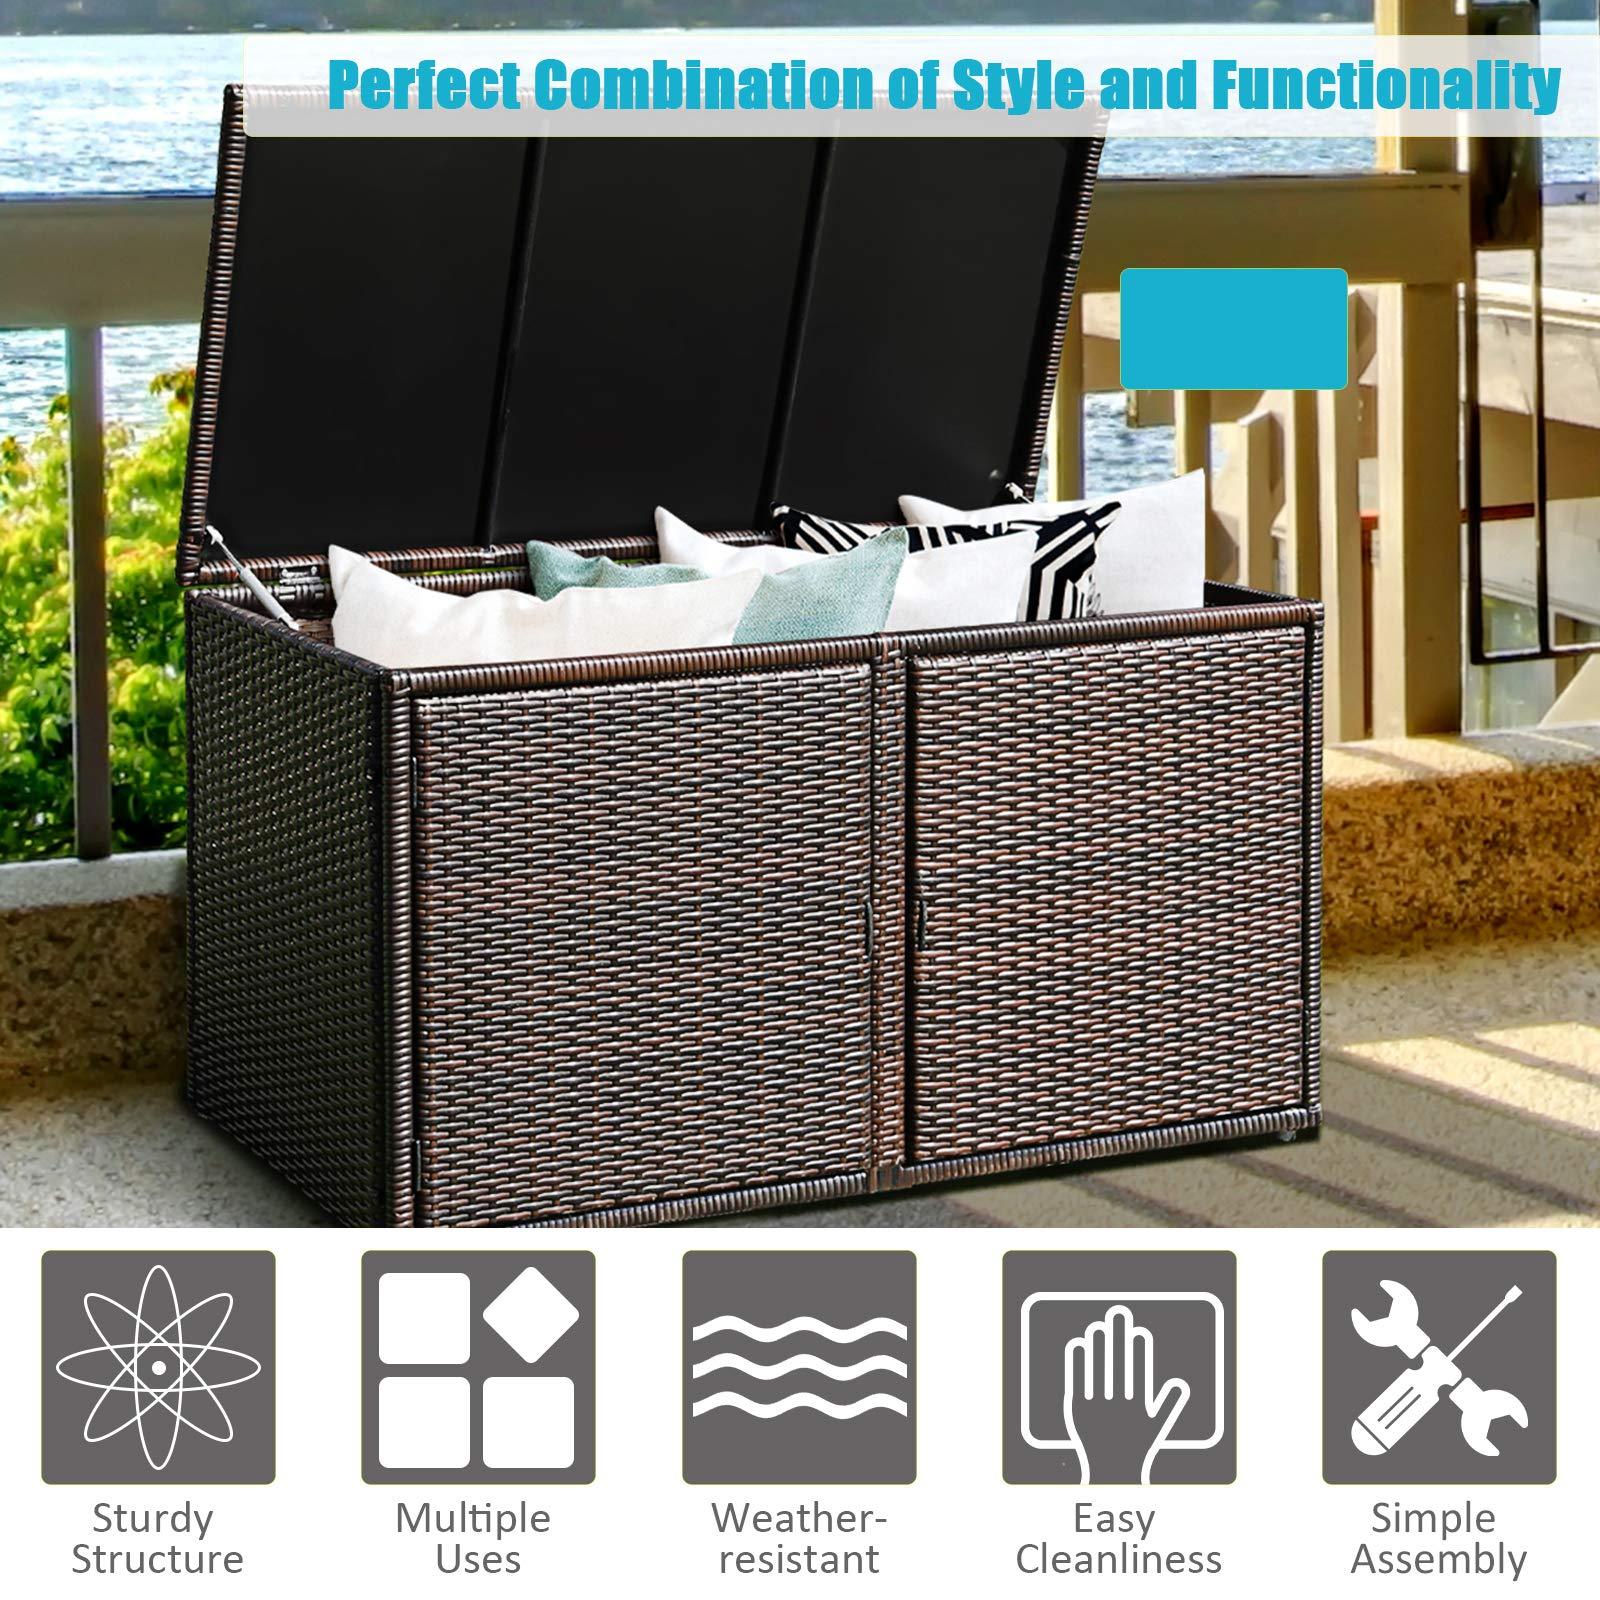 HAPPYGRILL Deck Box Outdoor Wicker Storage Box Cabinet 88 Gallon Storage Container Bin Box for Toys Furniture Tools in Garden Balcony Porch Yard - CookCave